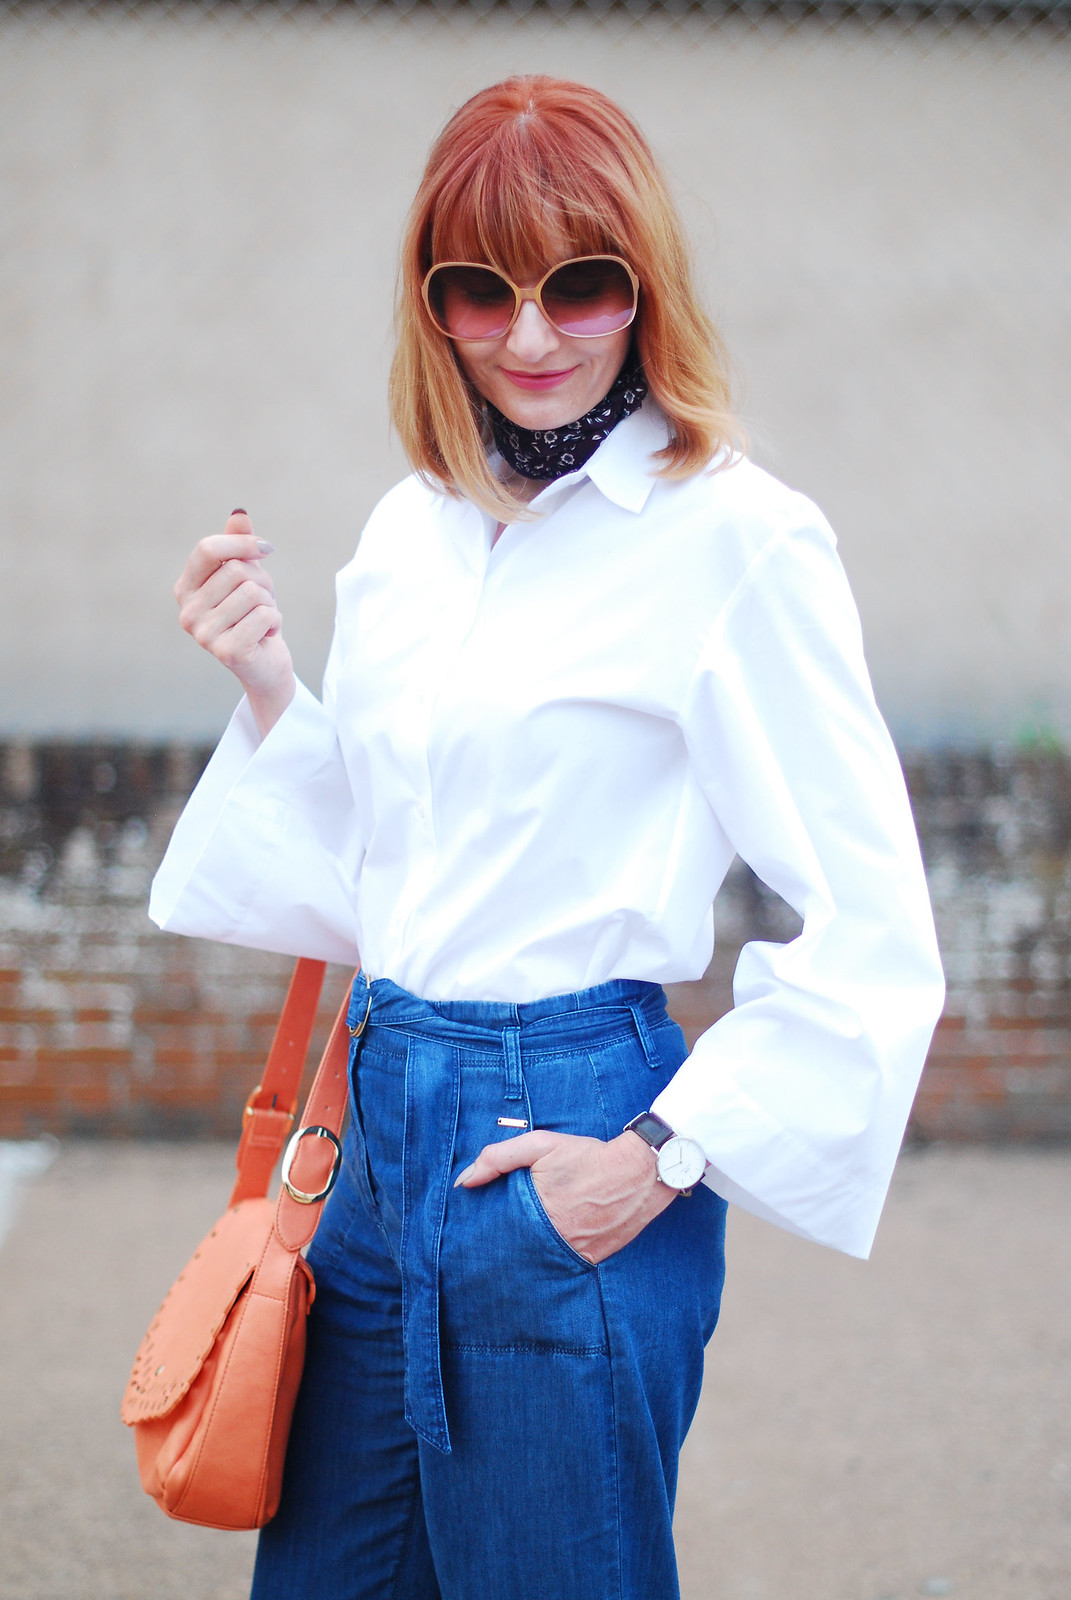 Styling a basic white top and denim: Marks & Spencer white bell-sleeve shirt and wide leg cropped jeans | Not Dressed As Lamb